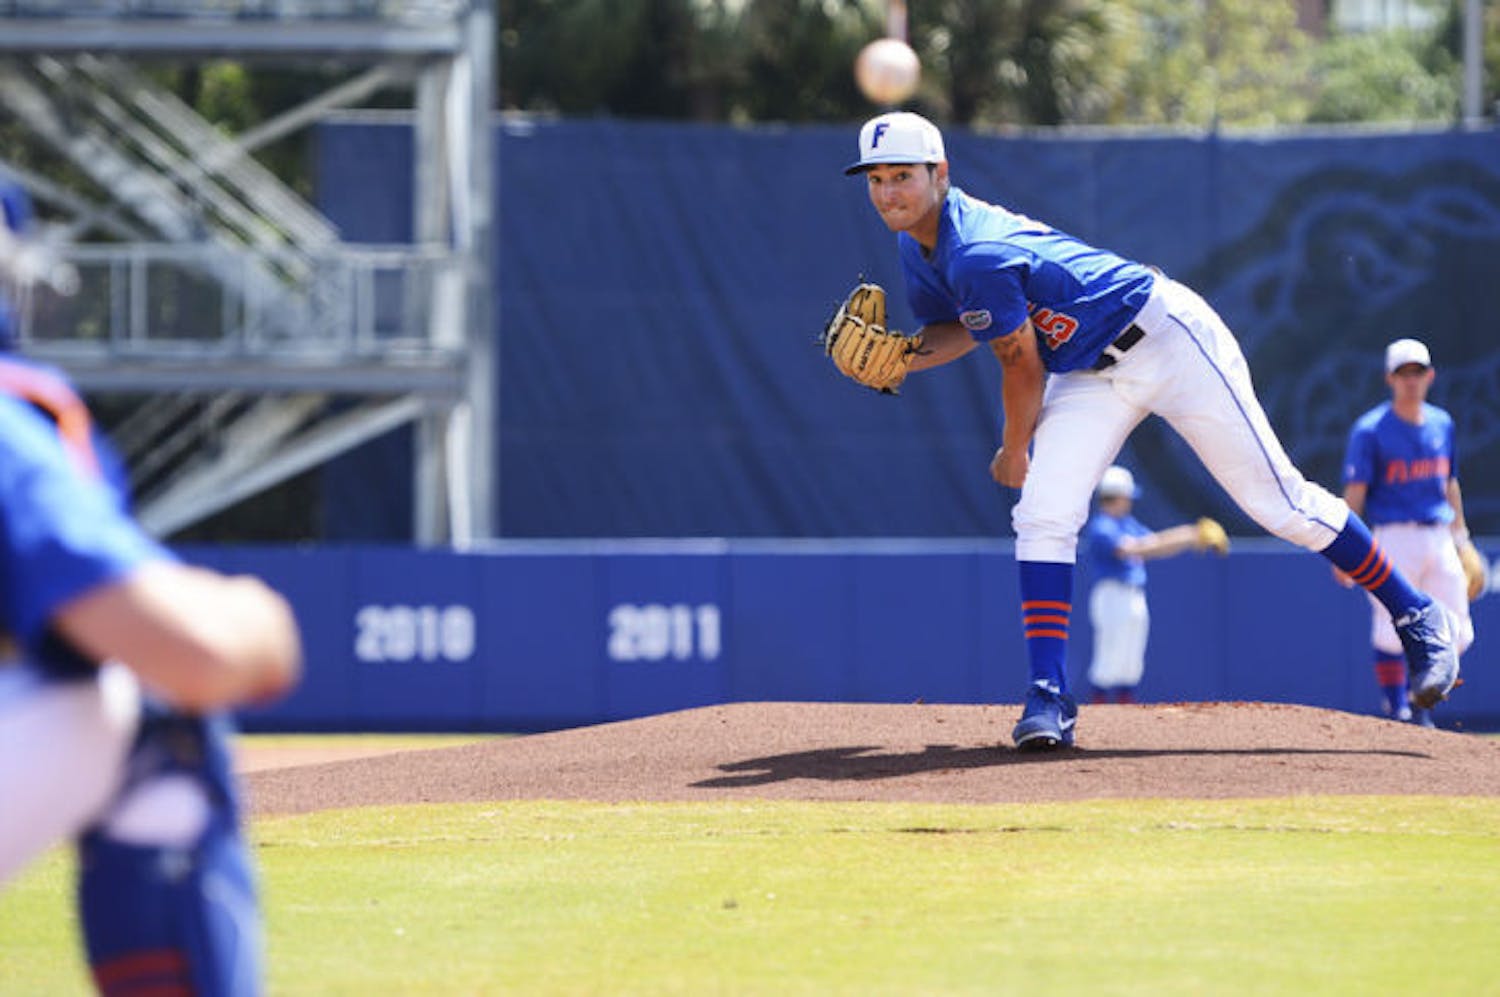 Freshman pitcher Danny Young warms up on the mound before Florida’s 4-0 victory against Ole Miss on March 31 at McKethan Stadium. Young picked up the loss in the Gators' 18-6 loss to the Tigers on Saturday.